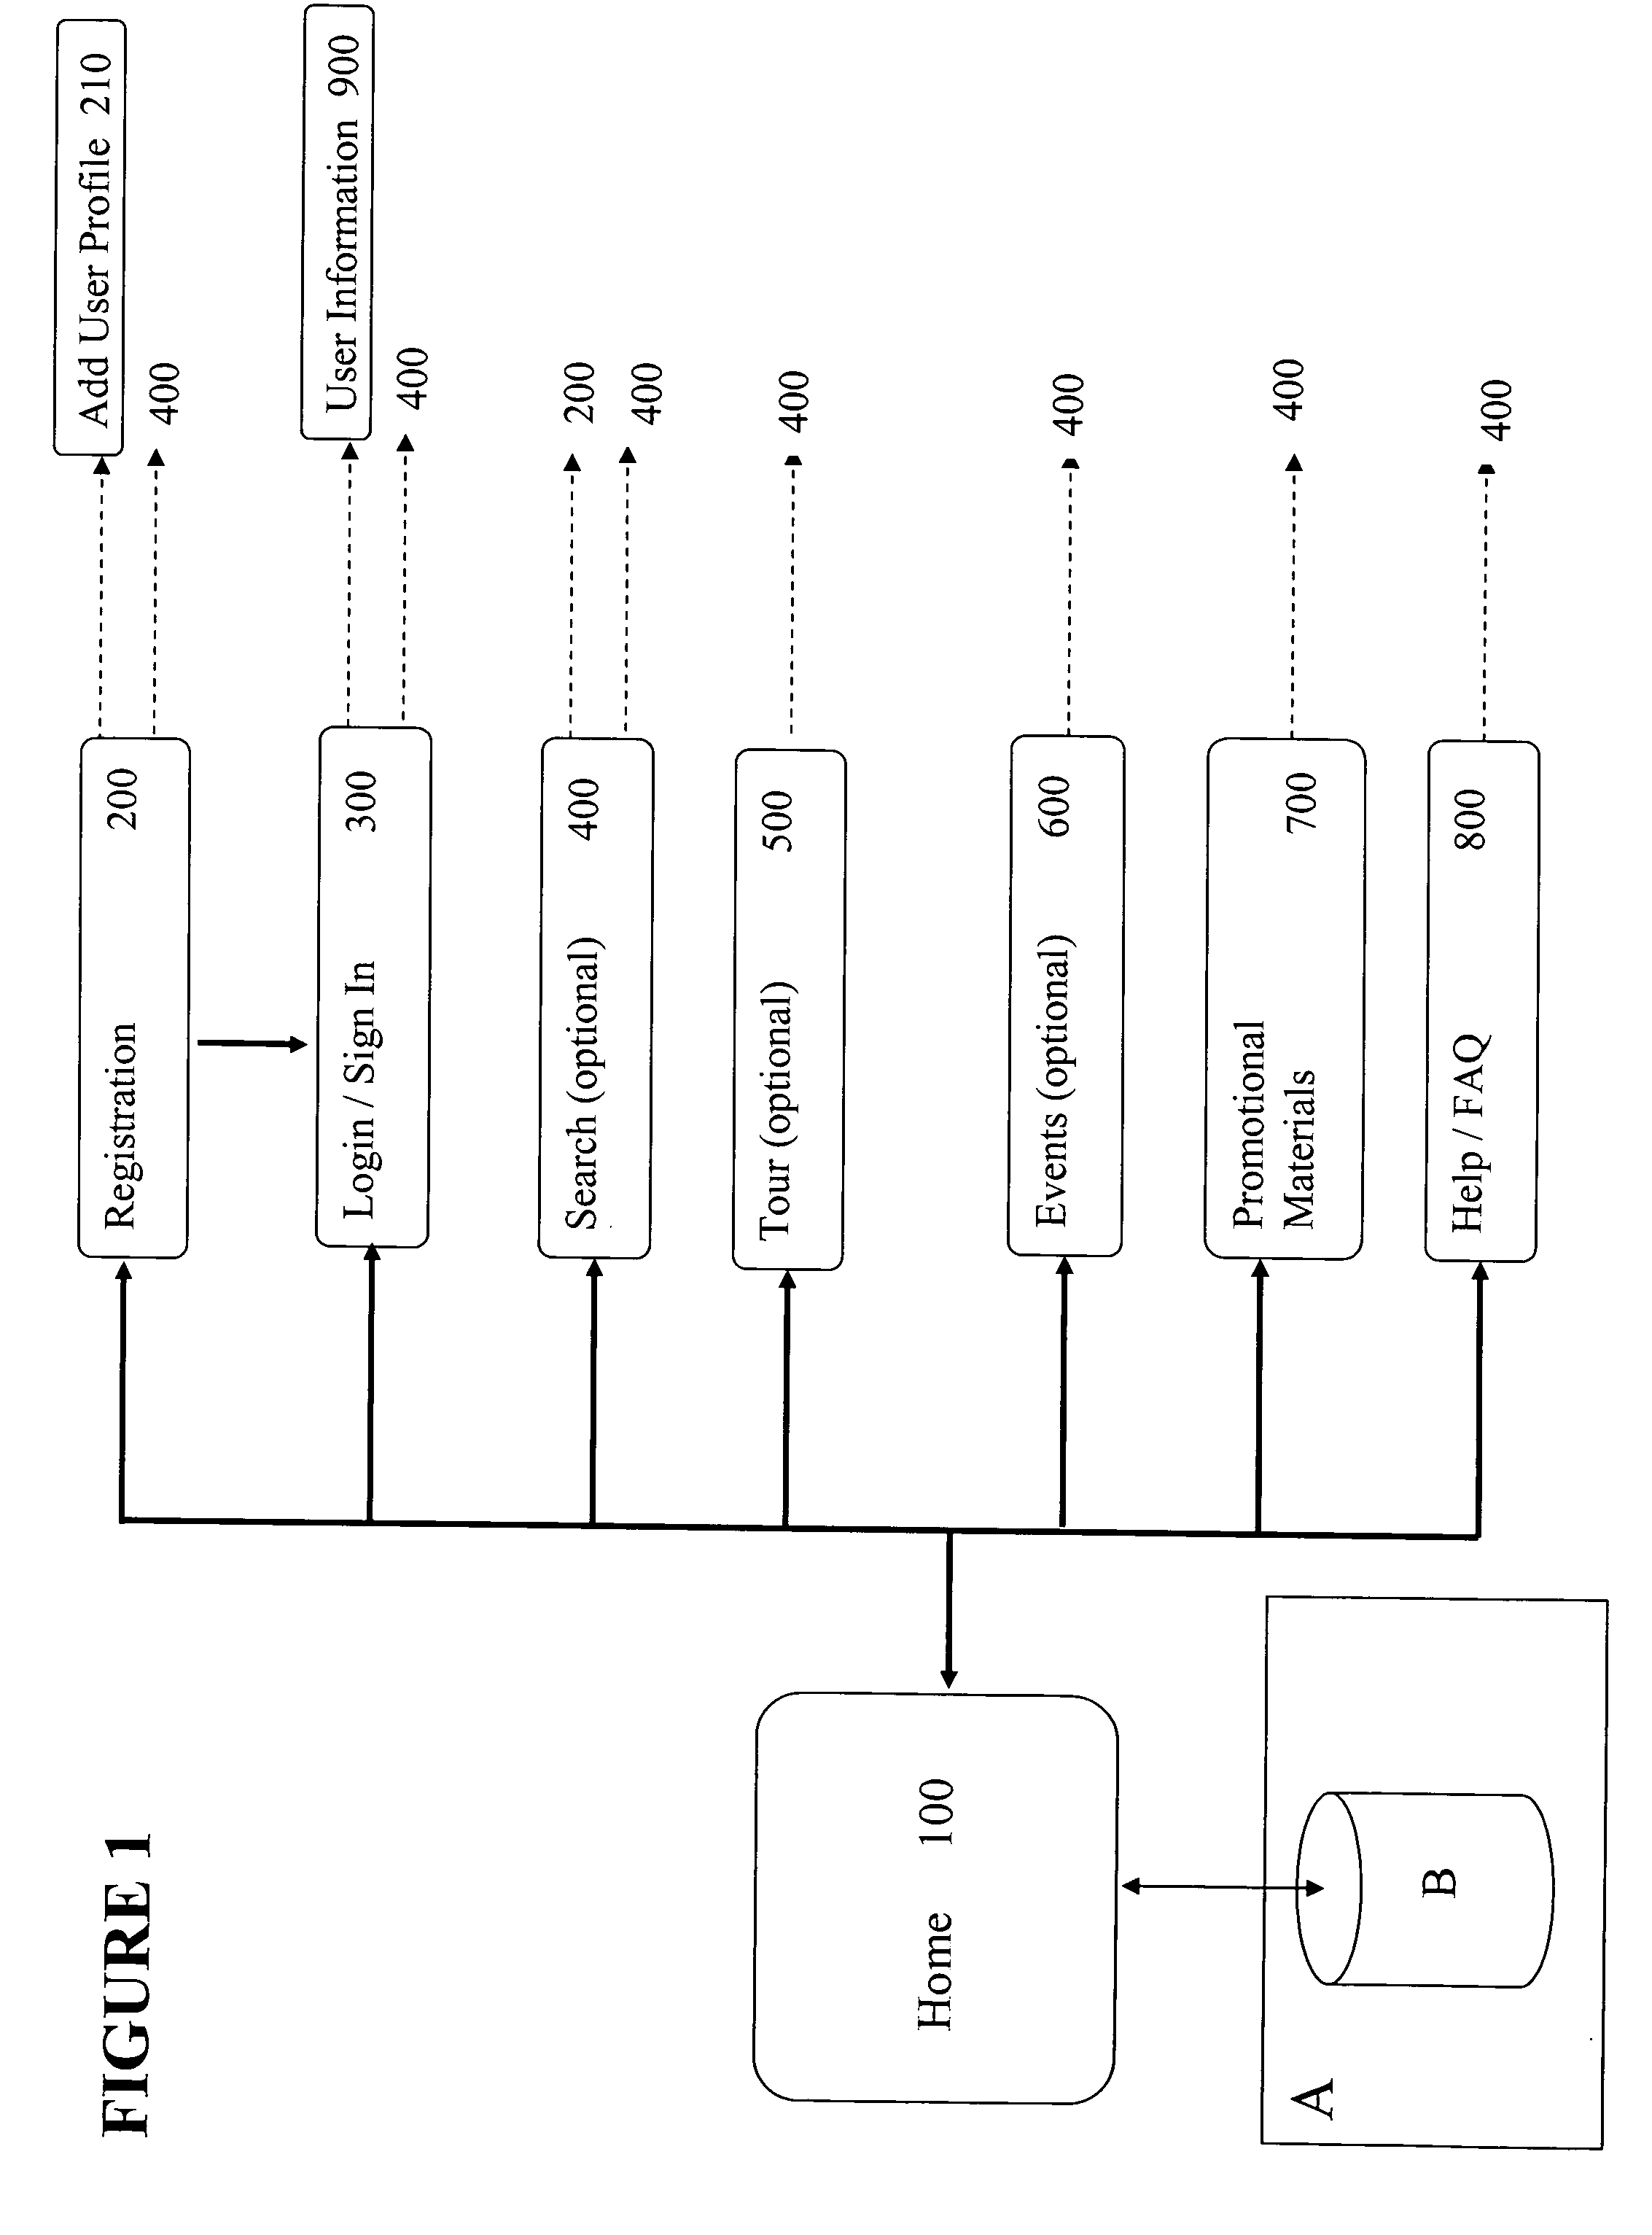 System and method for personal communication over a global computer network